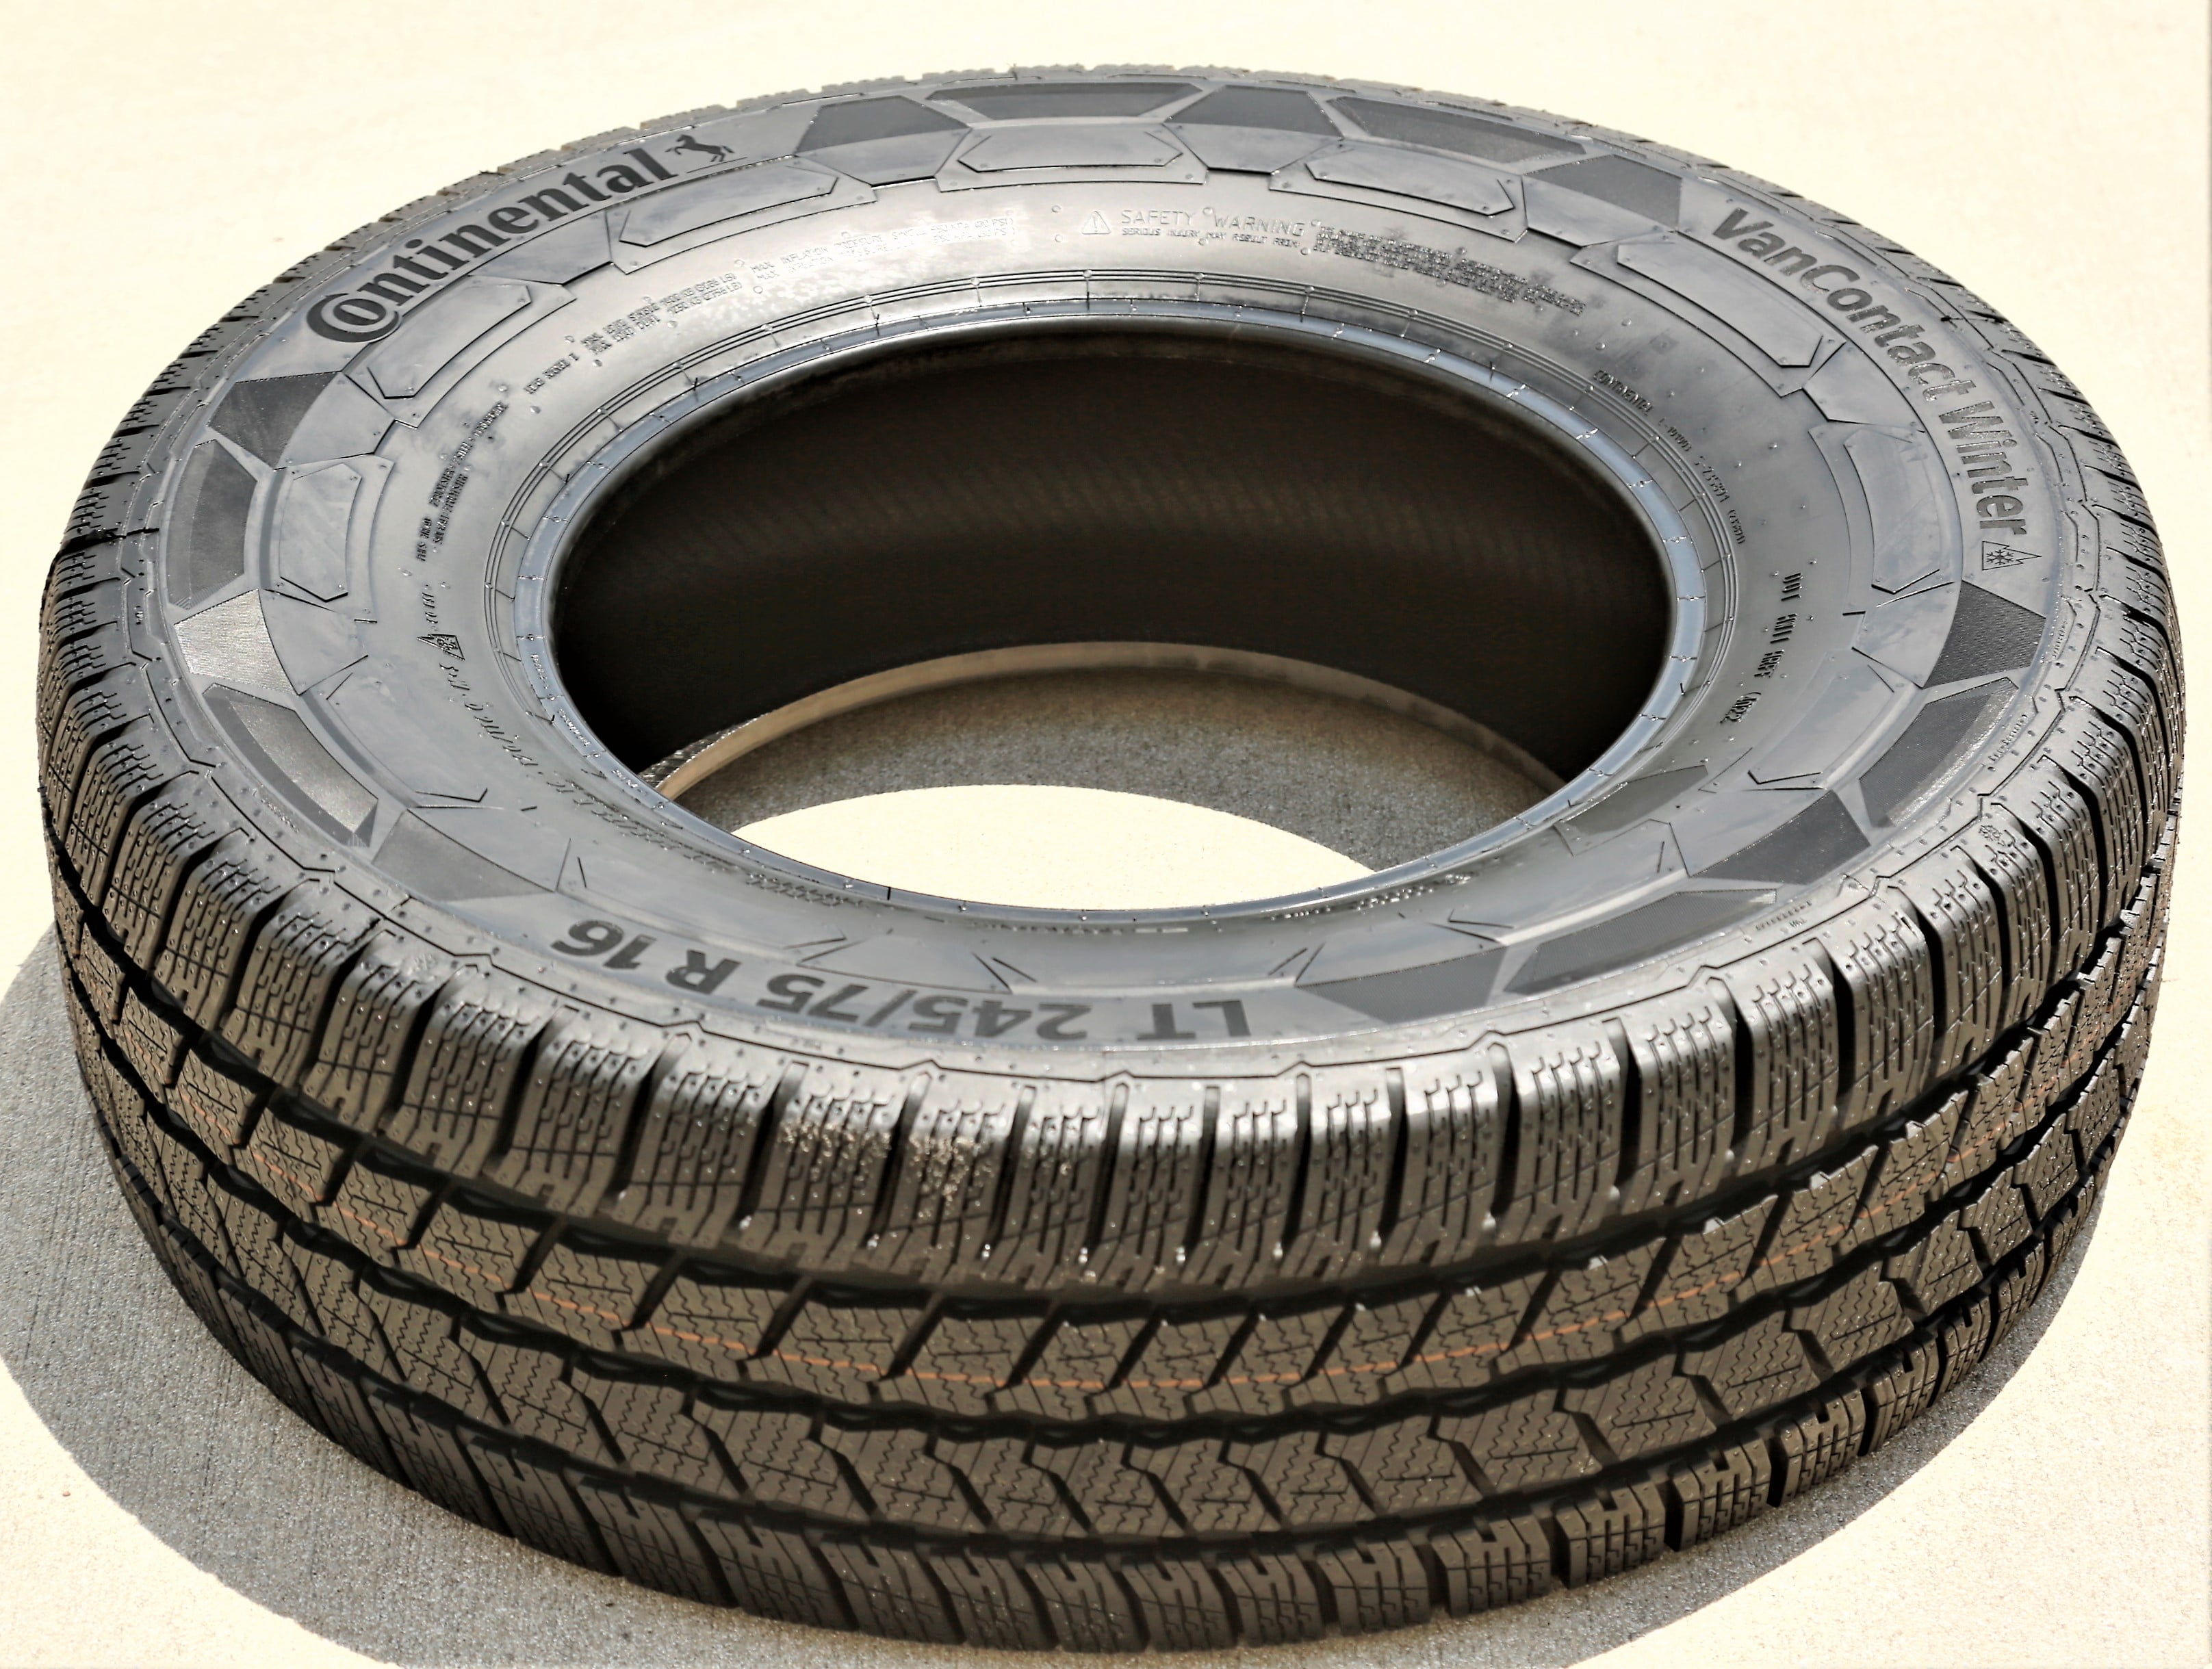 Pair of E Dodge Ram Winter Base 2 Snow 2500 Lariat, 245/75R16 F-150 Continental 1994-2002 (Studless) Tires Ford LT VanContact 2000-04 10 (TWO) Ply Fits: (MO)